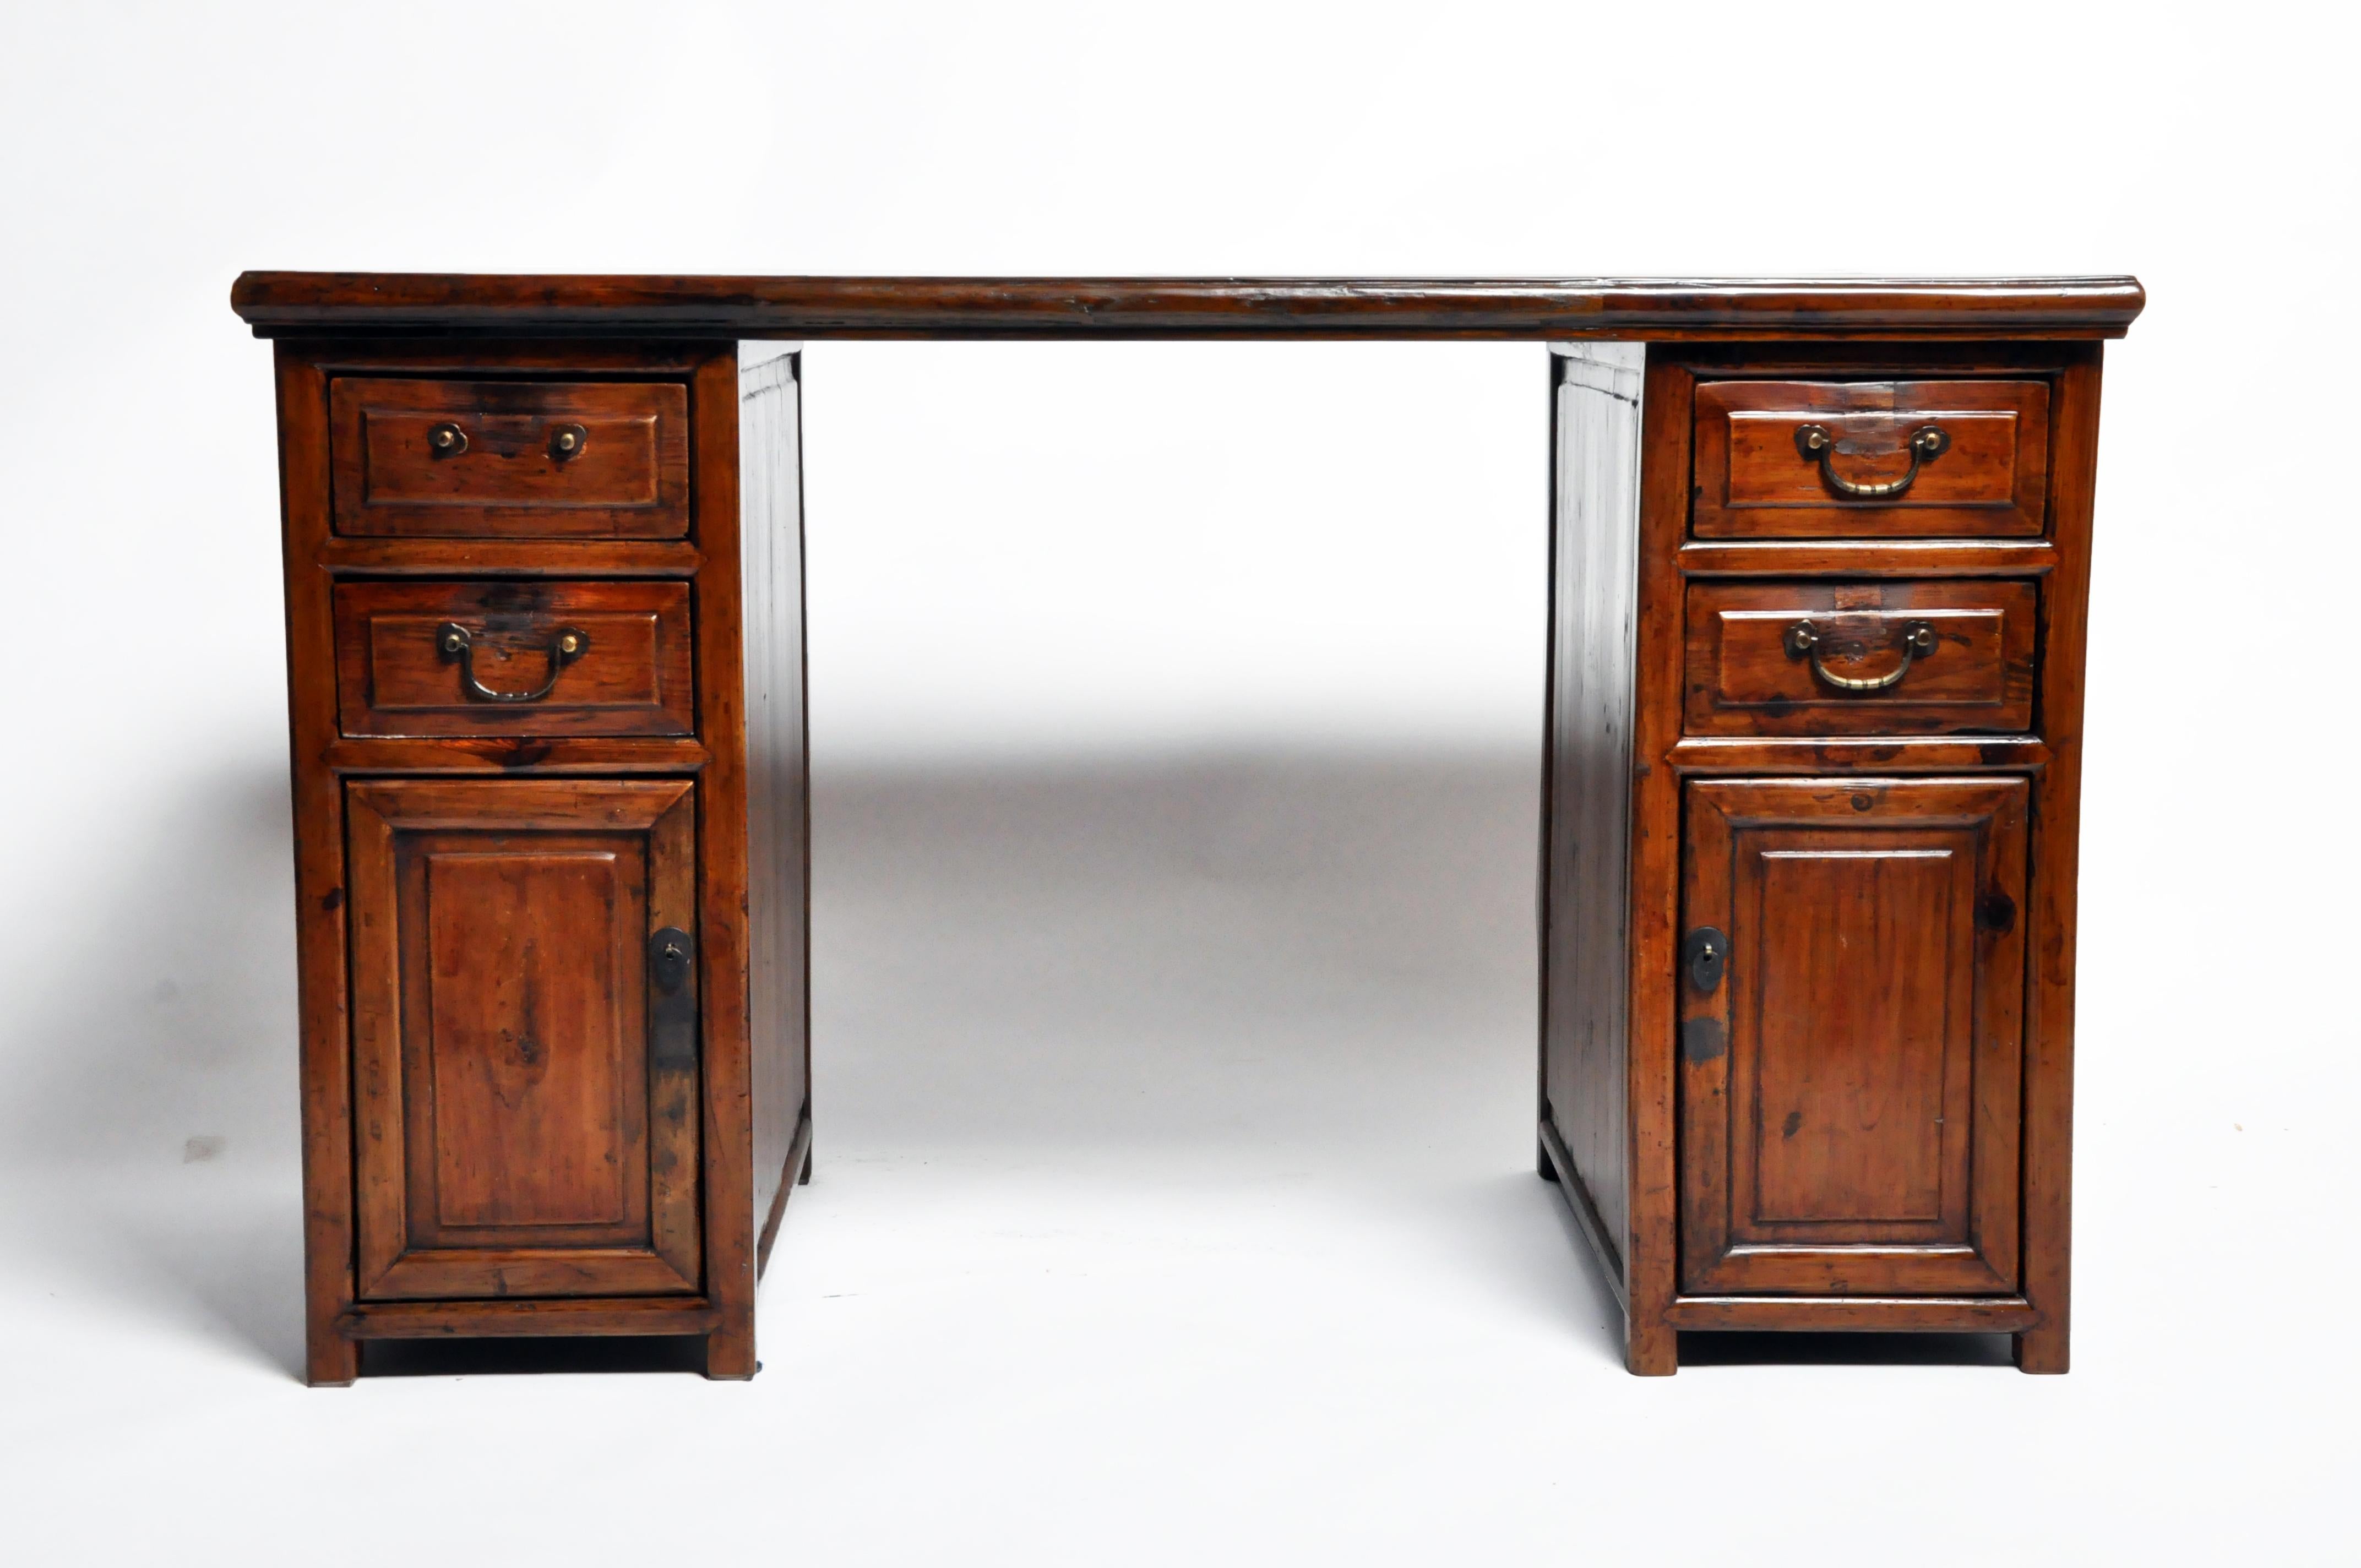 This handsome British Colonial desk is from Thailand and was made from wood, circa 20th century. The desk features four drawers and two doors for additional storage space. Wear consistent with age and use.
   